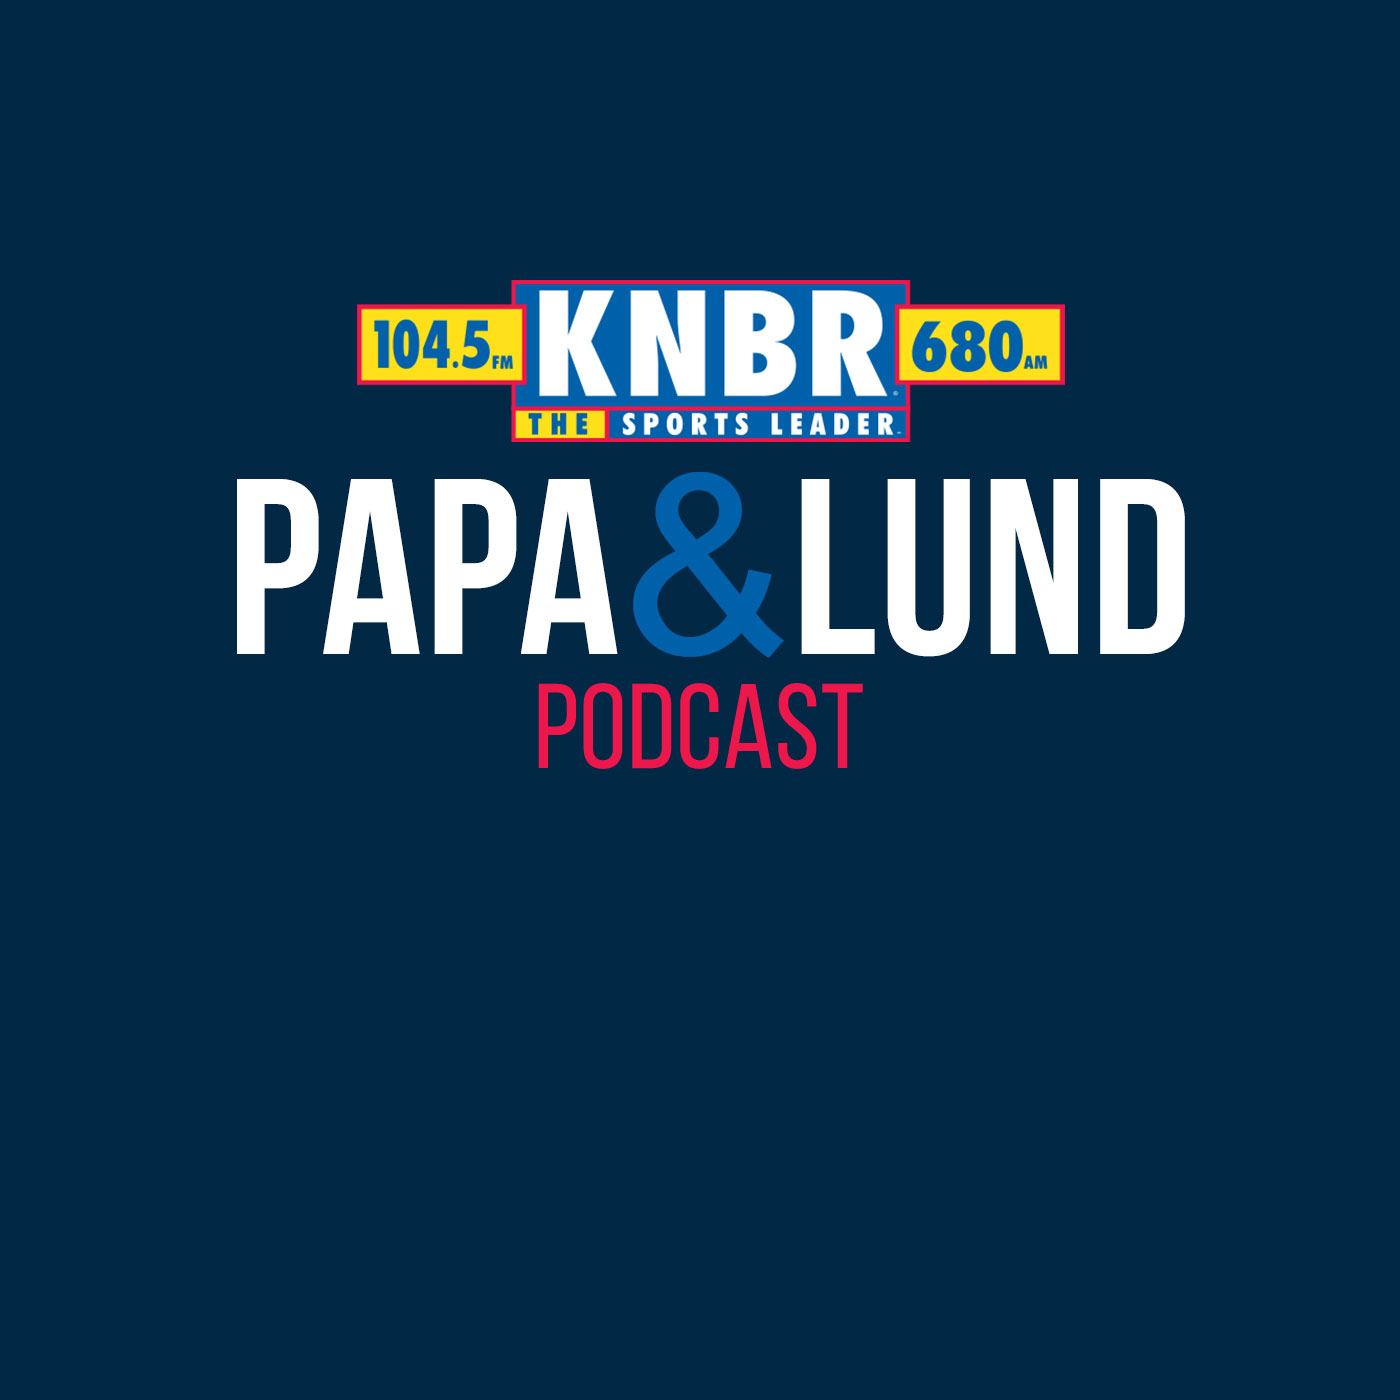 11-15 Shaun King joins Papa and Lund to provide insight on the Bucs and what we should expect from Baker Mayfield ahead of the 49ers-Tampa Bay matchup